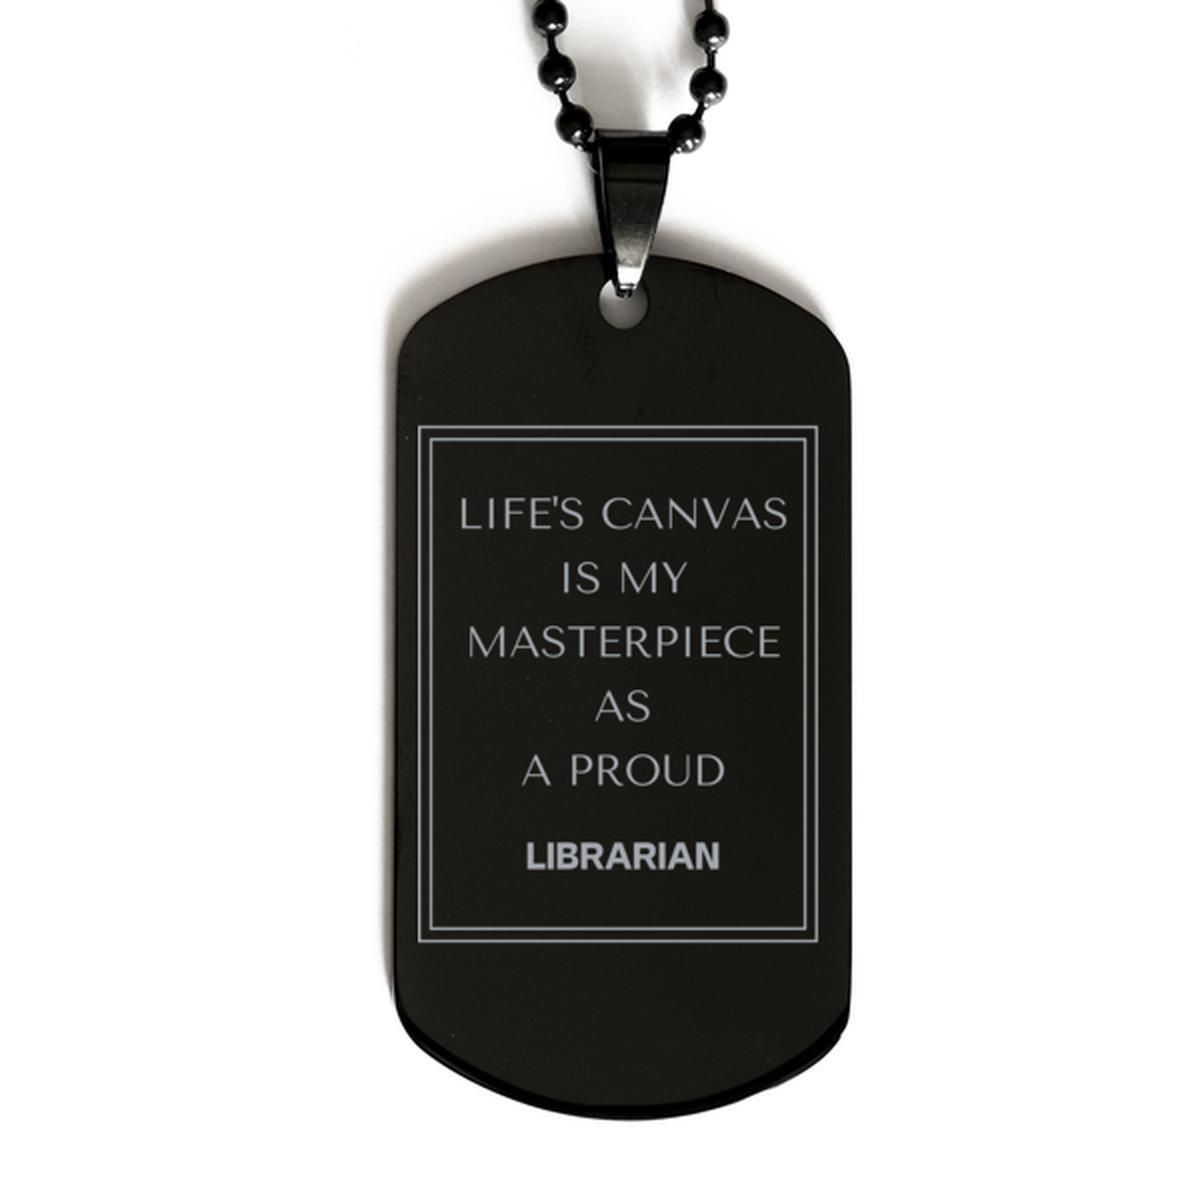 Proud Librarian Gifts, Life's canvas is my masterpiece, Epic Birthday Christmas Unique Black Dog Tag For Librarian, Coworkers, Men, Women, Friends